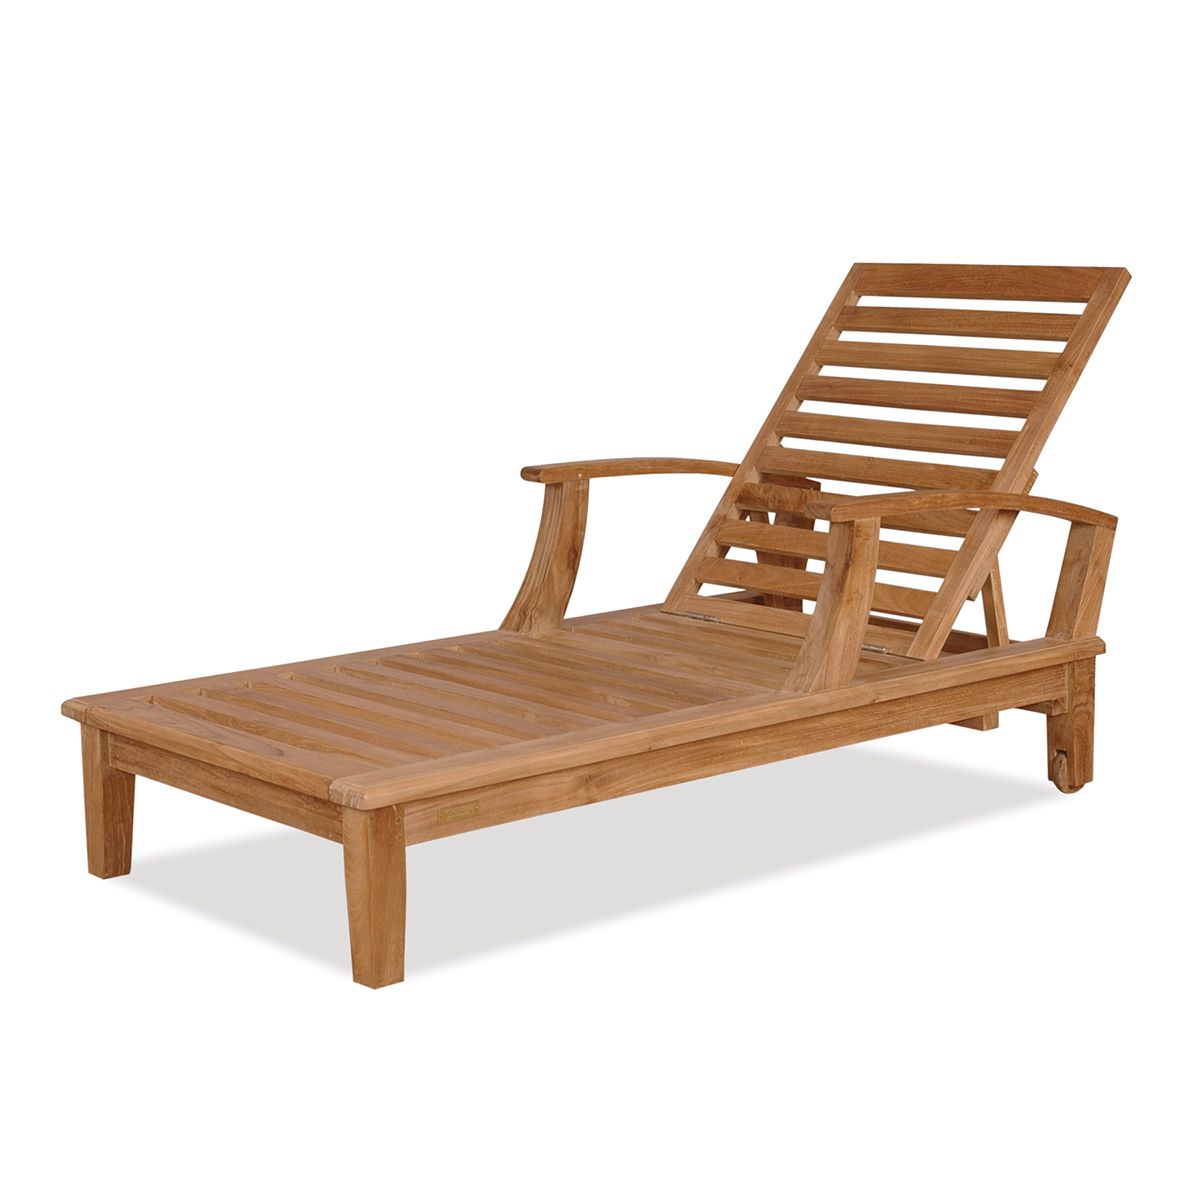 Widely Used Teak Chaise Loungers With Regard To Teak Chaise Lounger – Classic Mid Century Design (View 3 of 25)